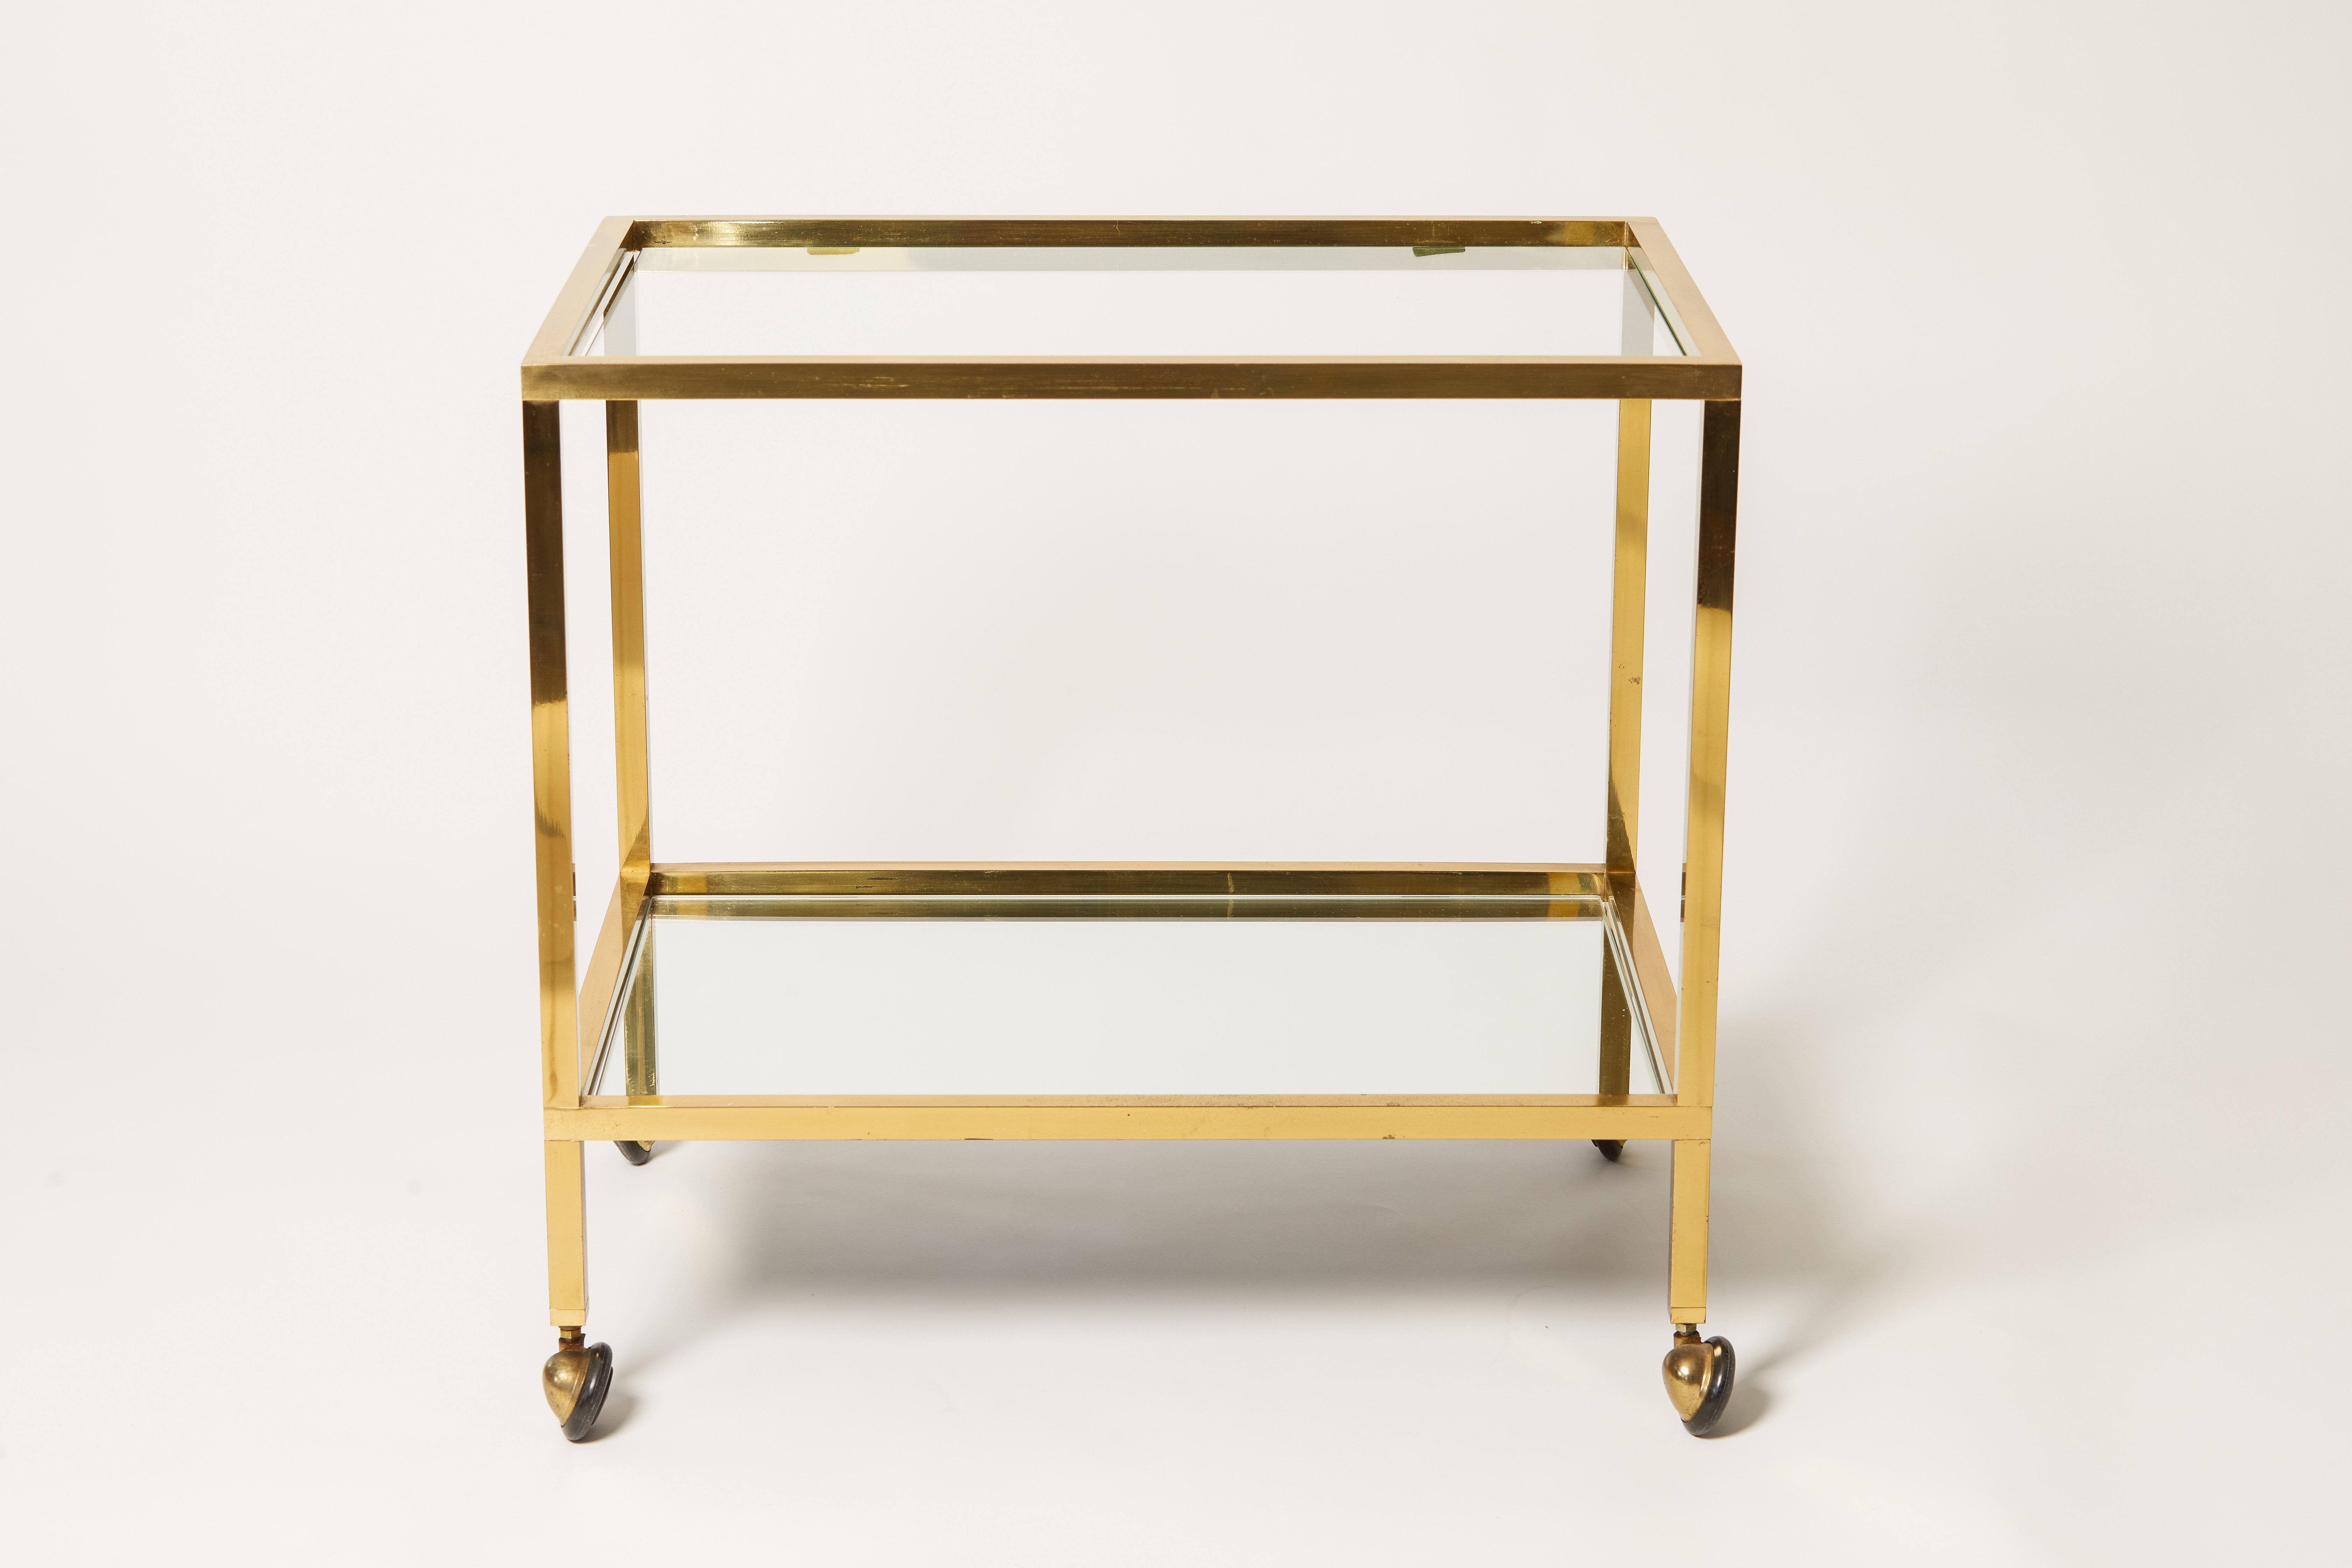 1960s Italian Brass, Glass & Mirror Bar Cart In Good Condition For Sale In Aspen, CO